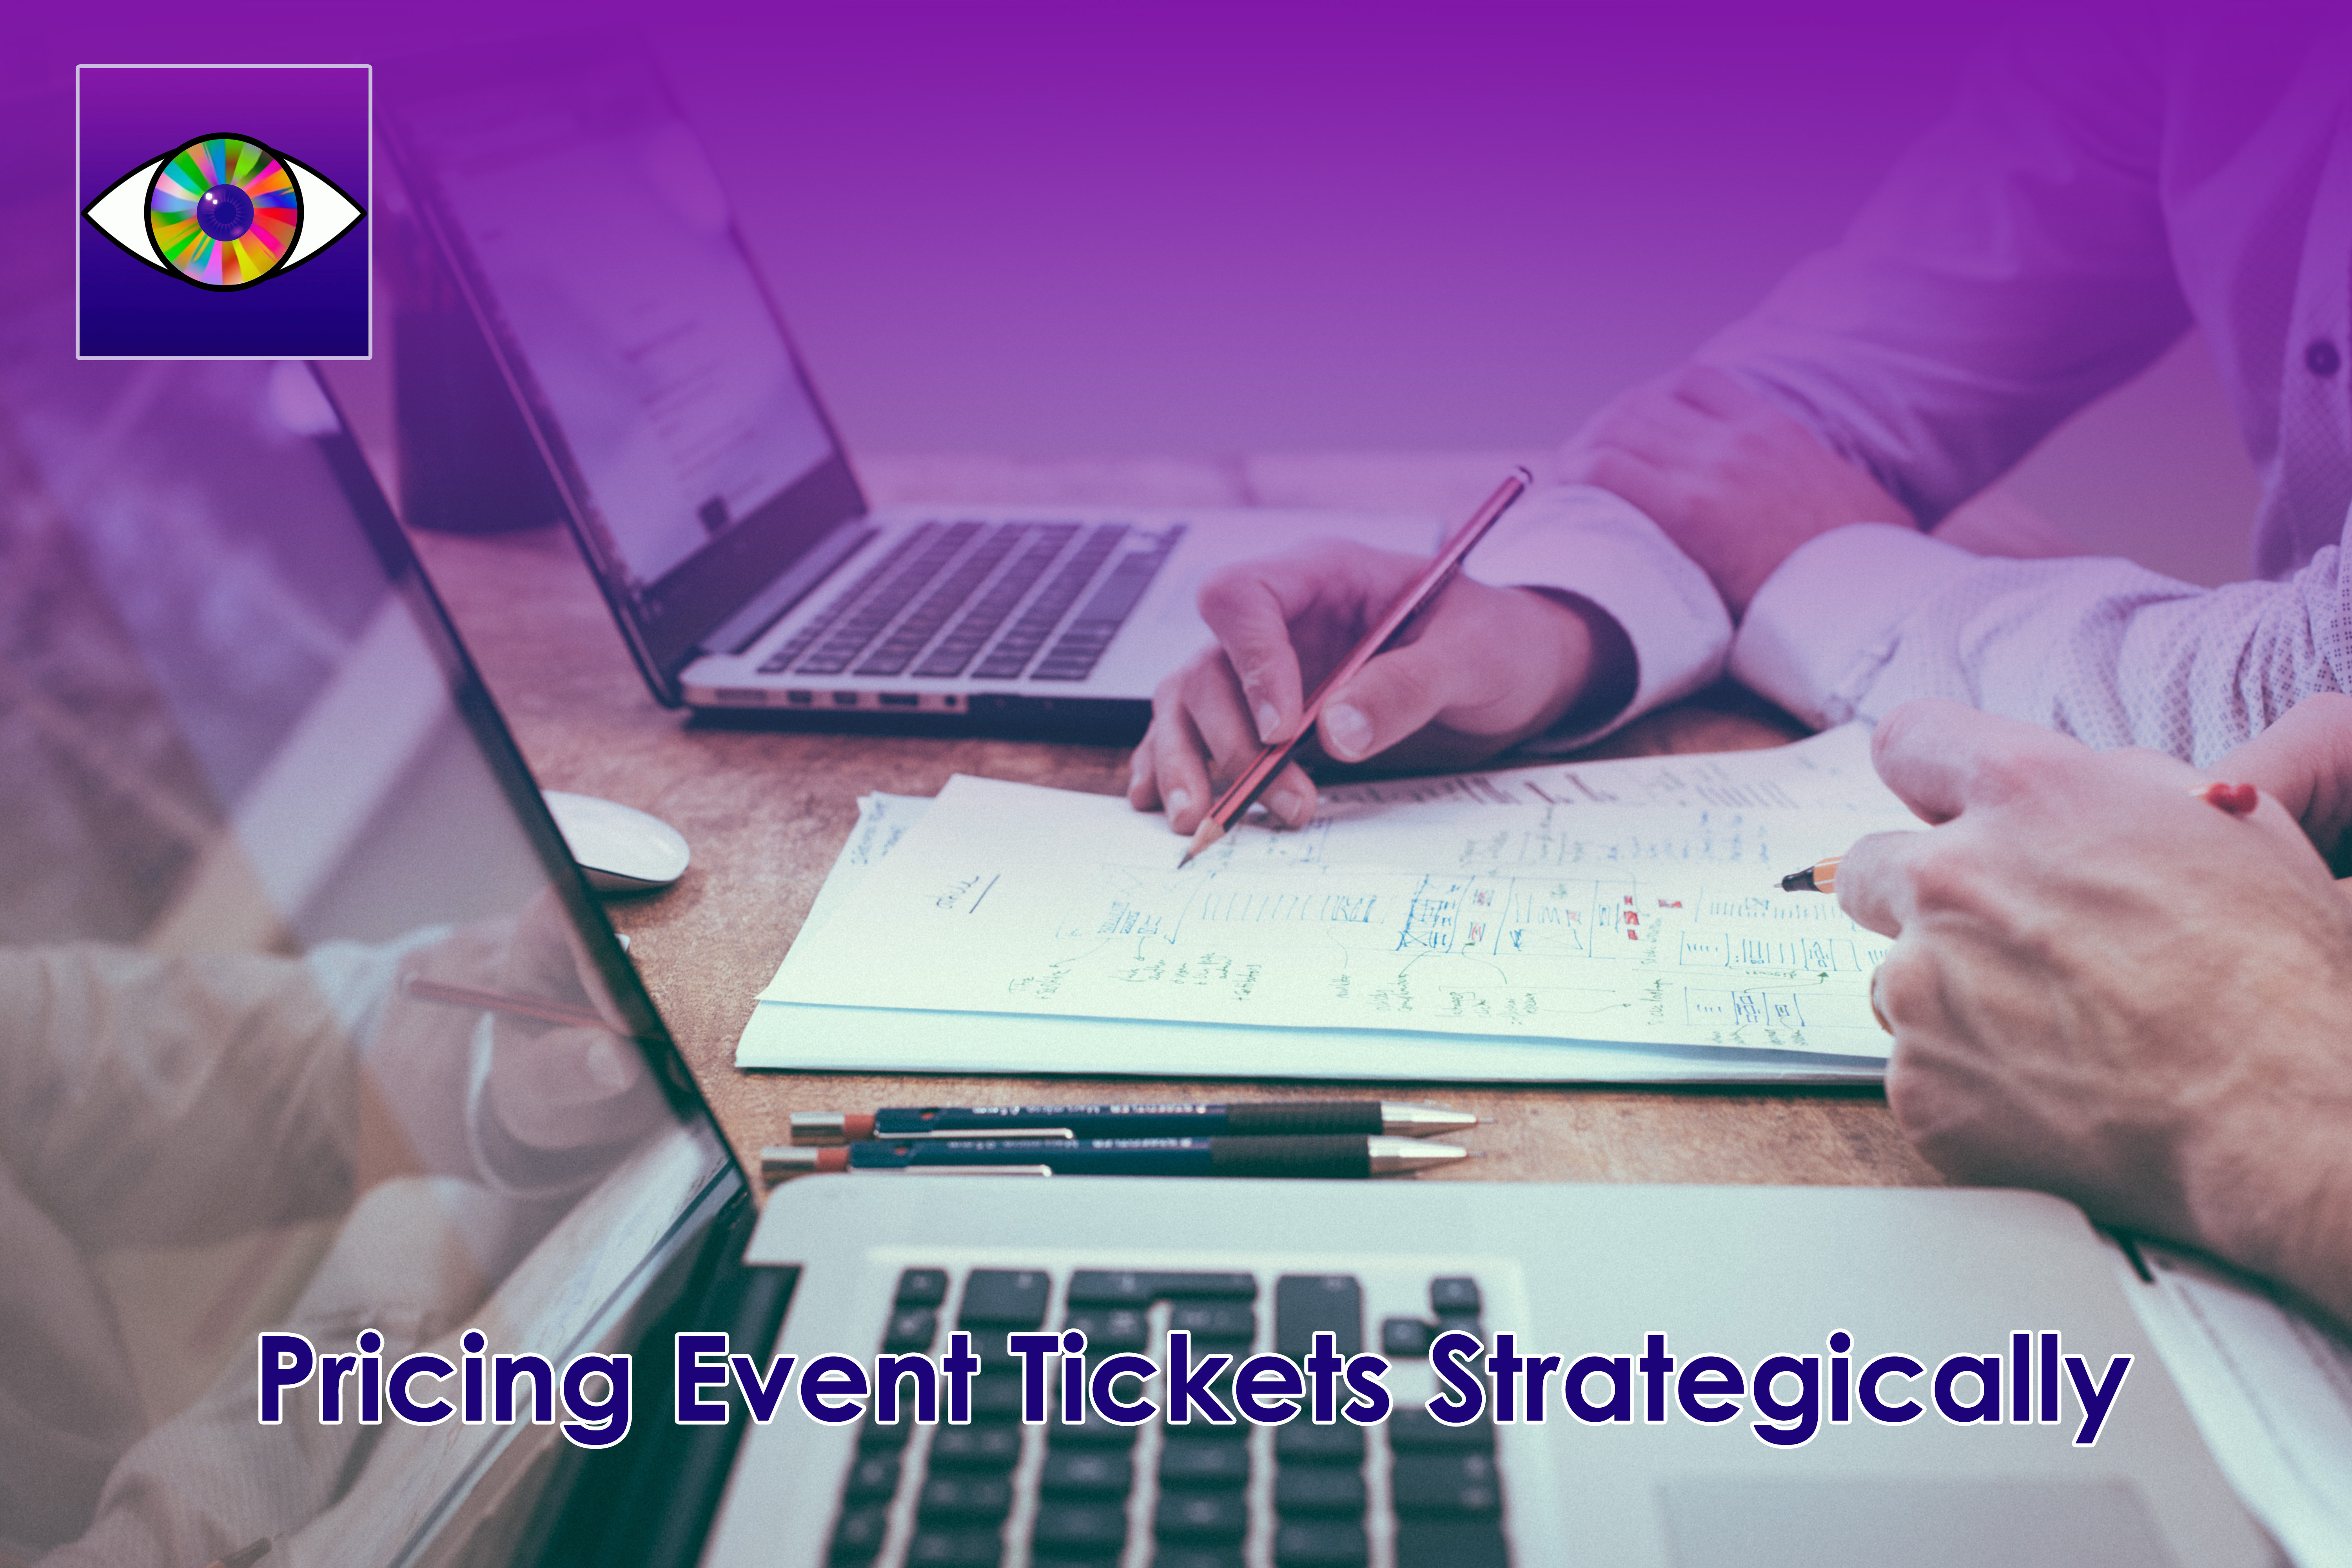 Pricing your event tickets strategically